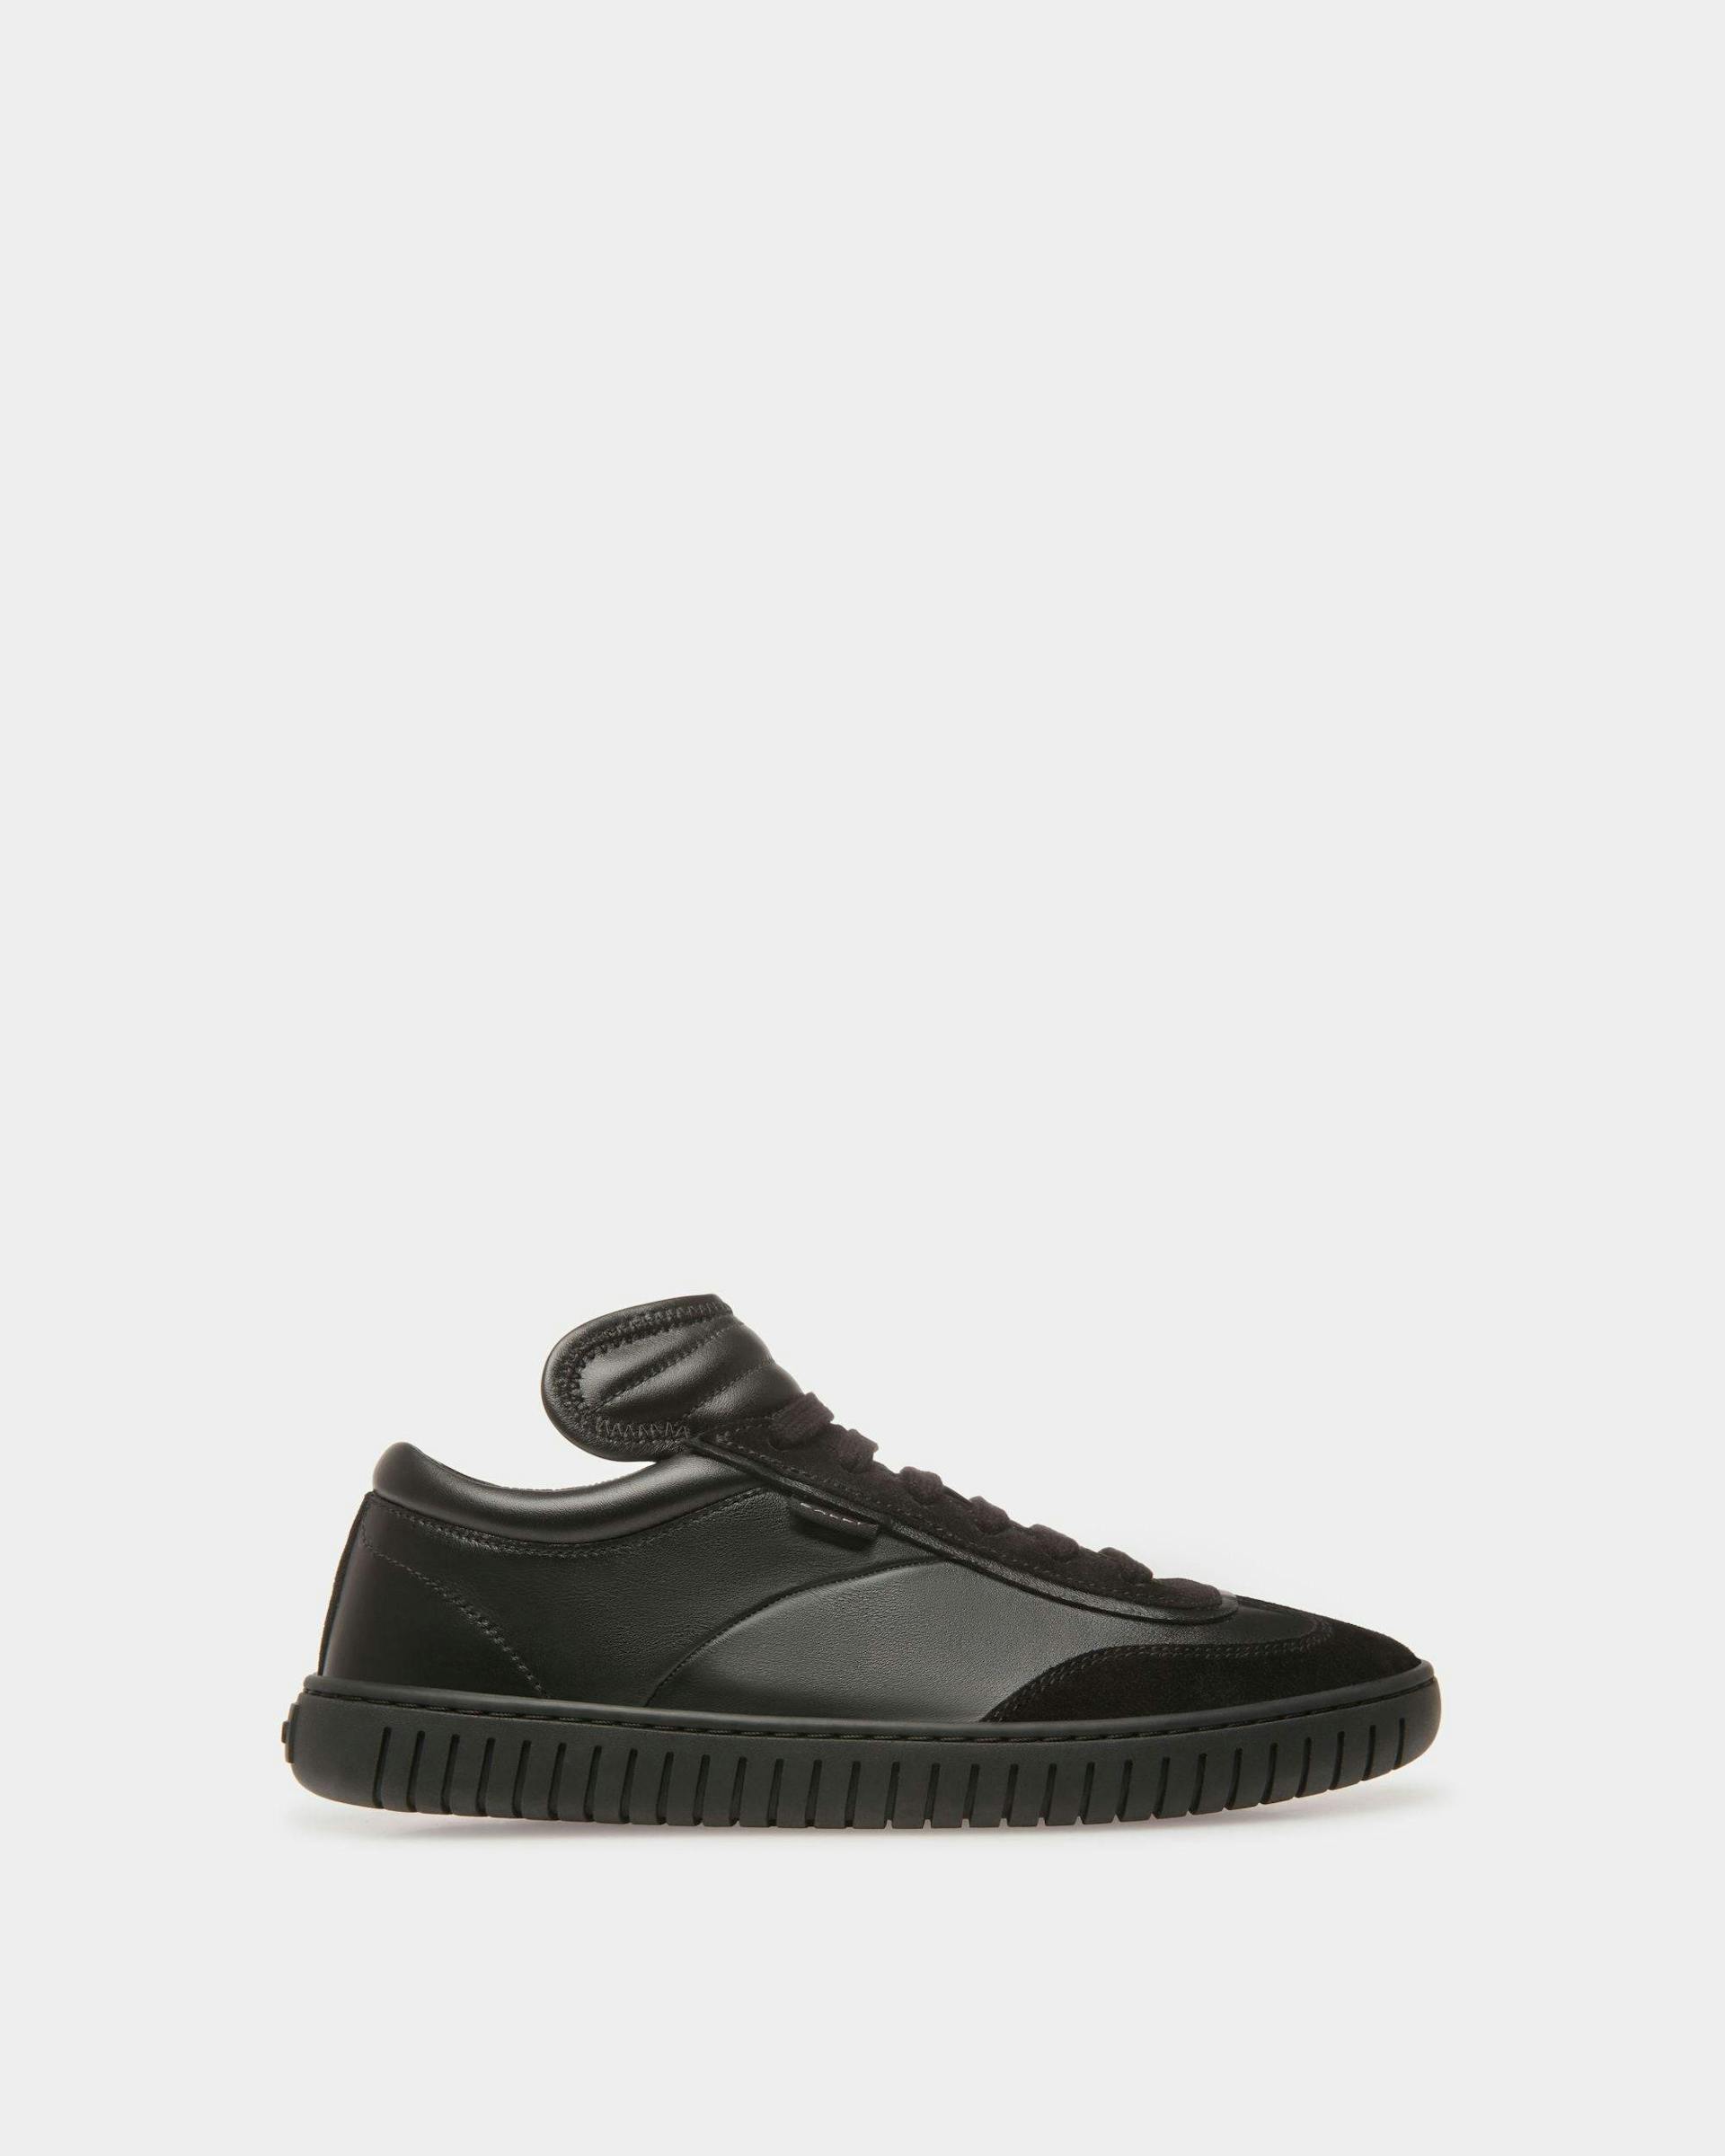 Player Sneakers In Black Leather - Women's - Bally - 01